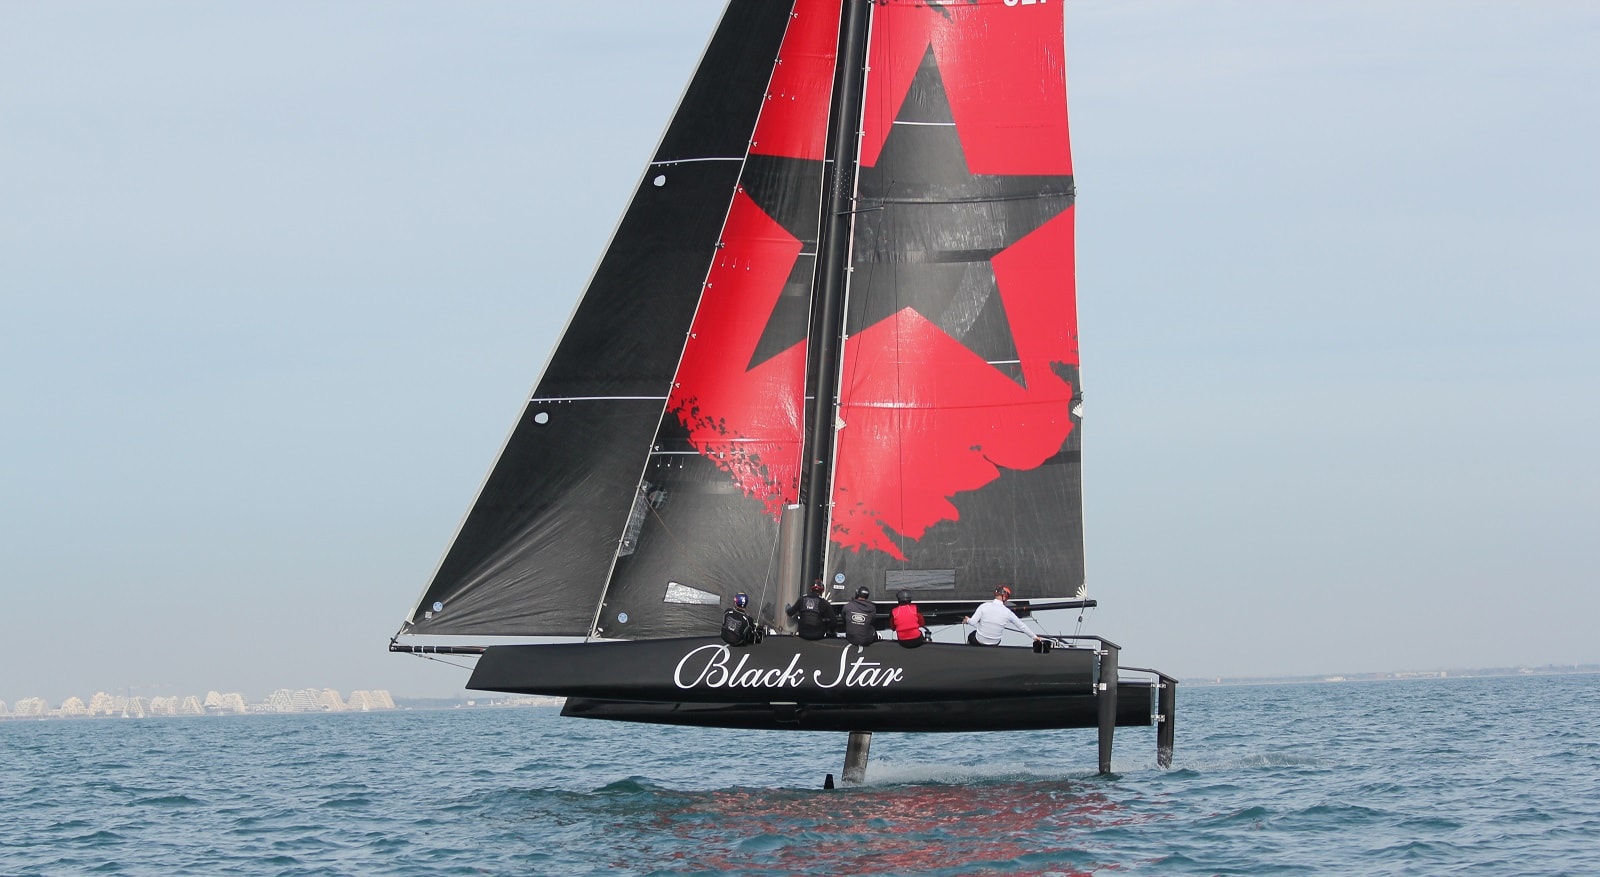 Composite support: Scheurer Swiss supports the first professional swissgerman sailing team "Black Star" at the GC32 Racing Tour.